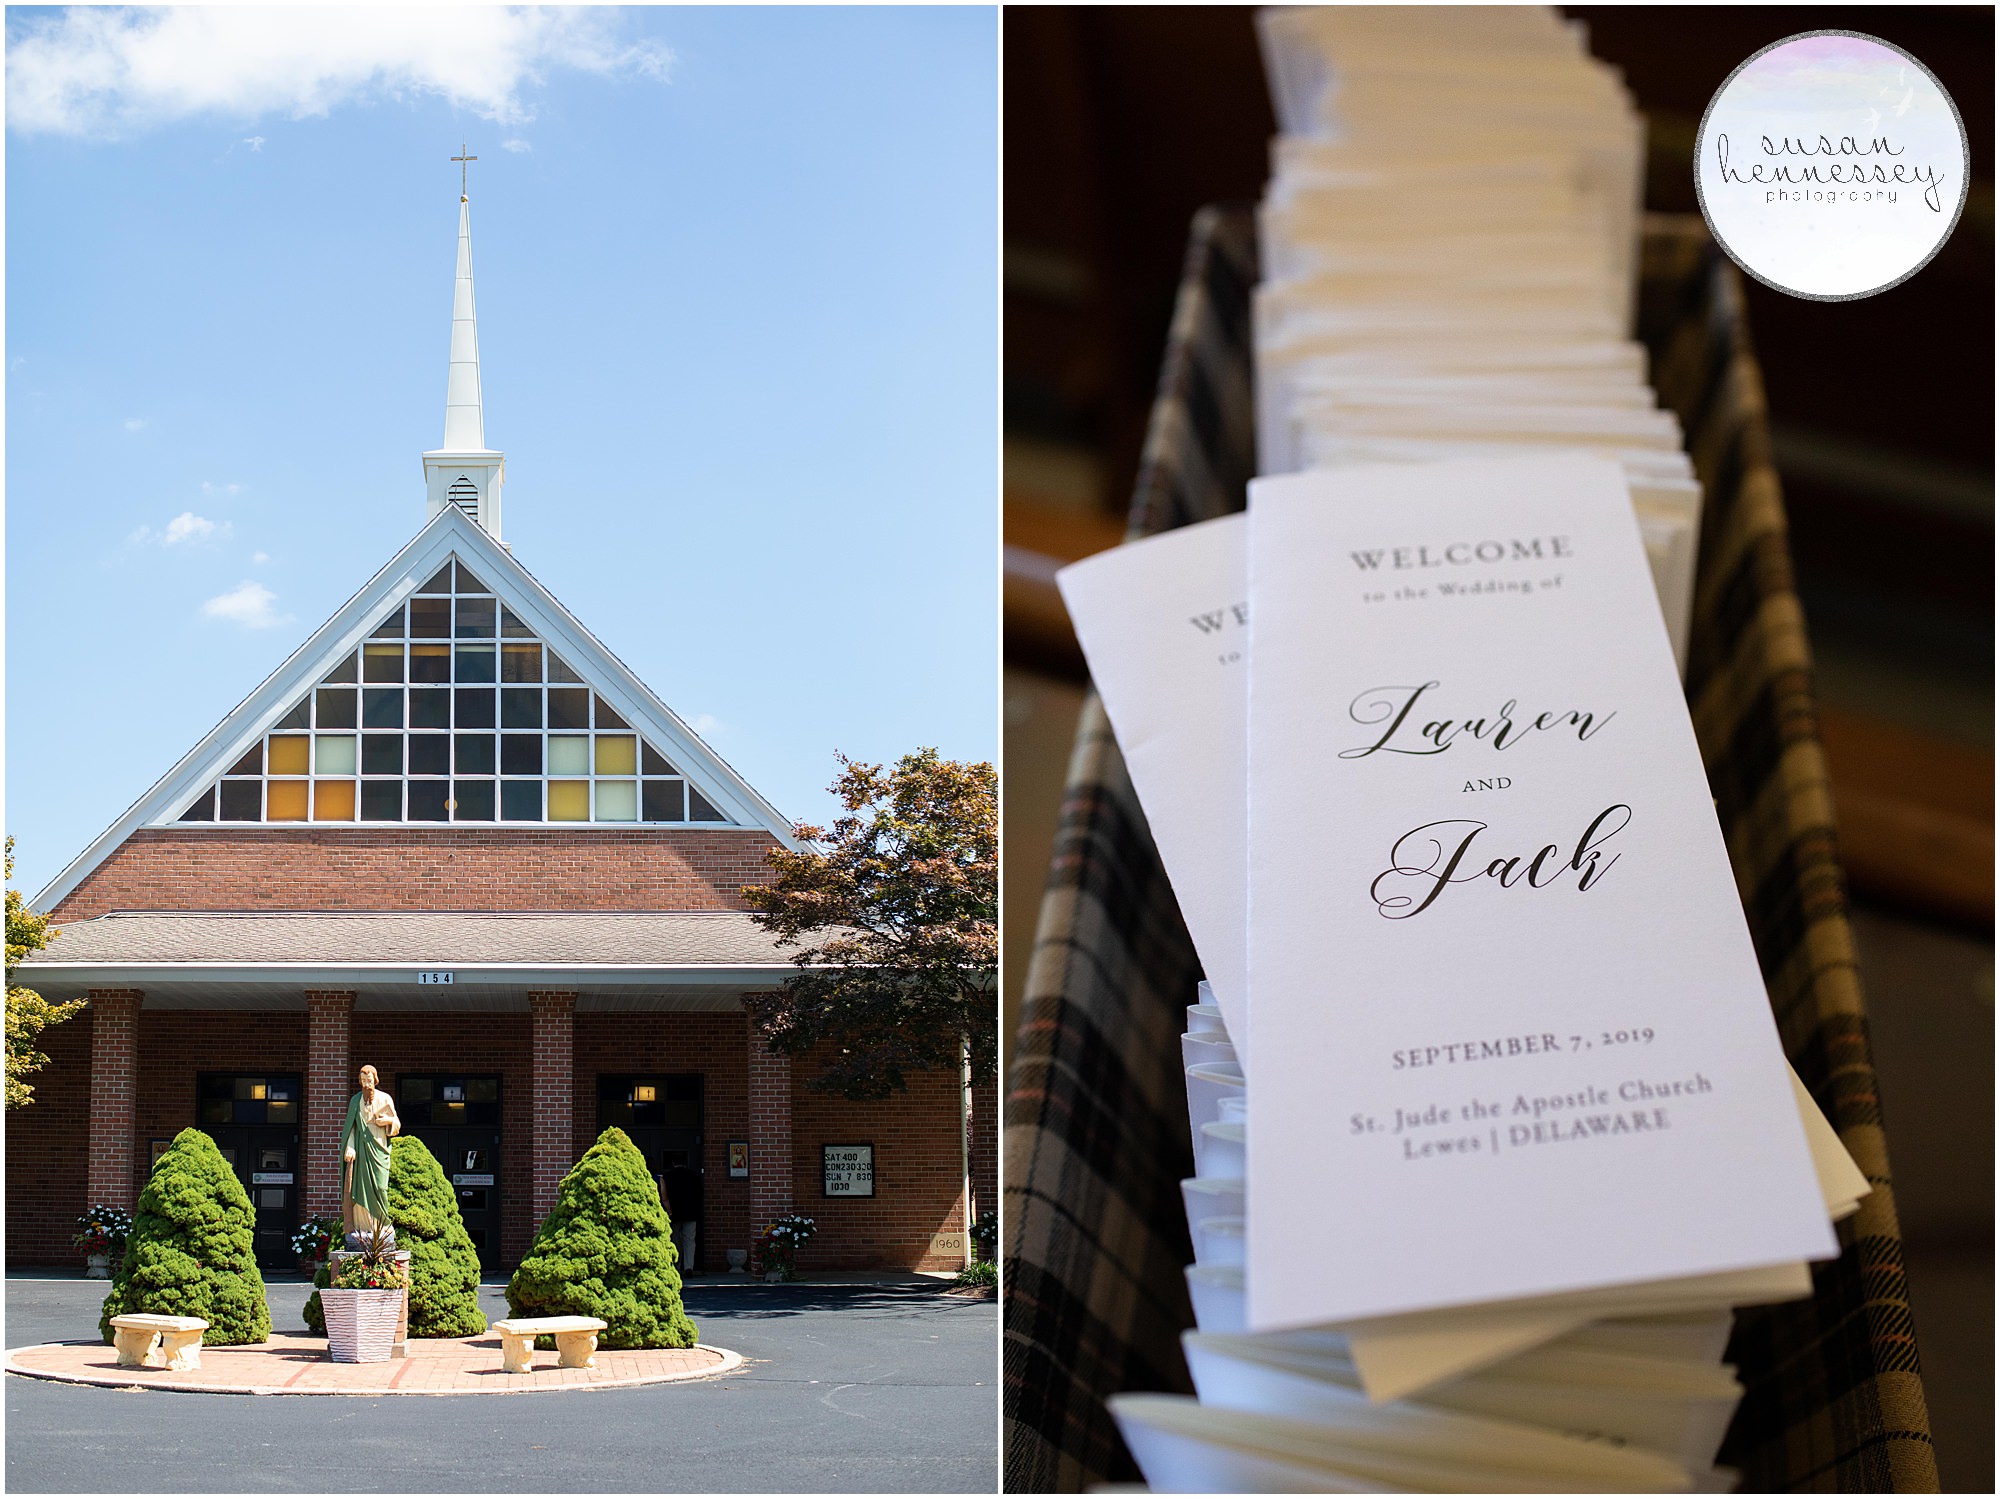 Rehoboth Beach Country Club Wedding with a traditional catholic ceremony